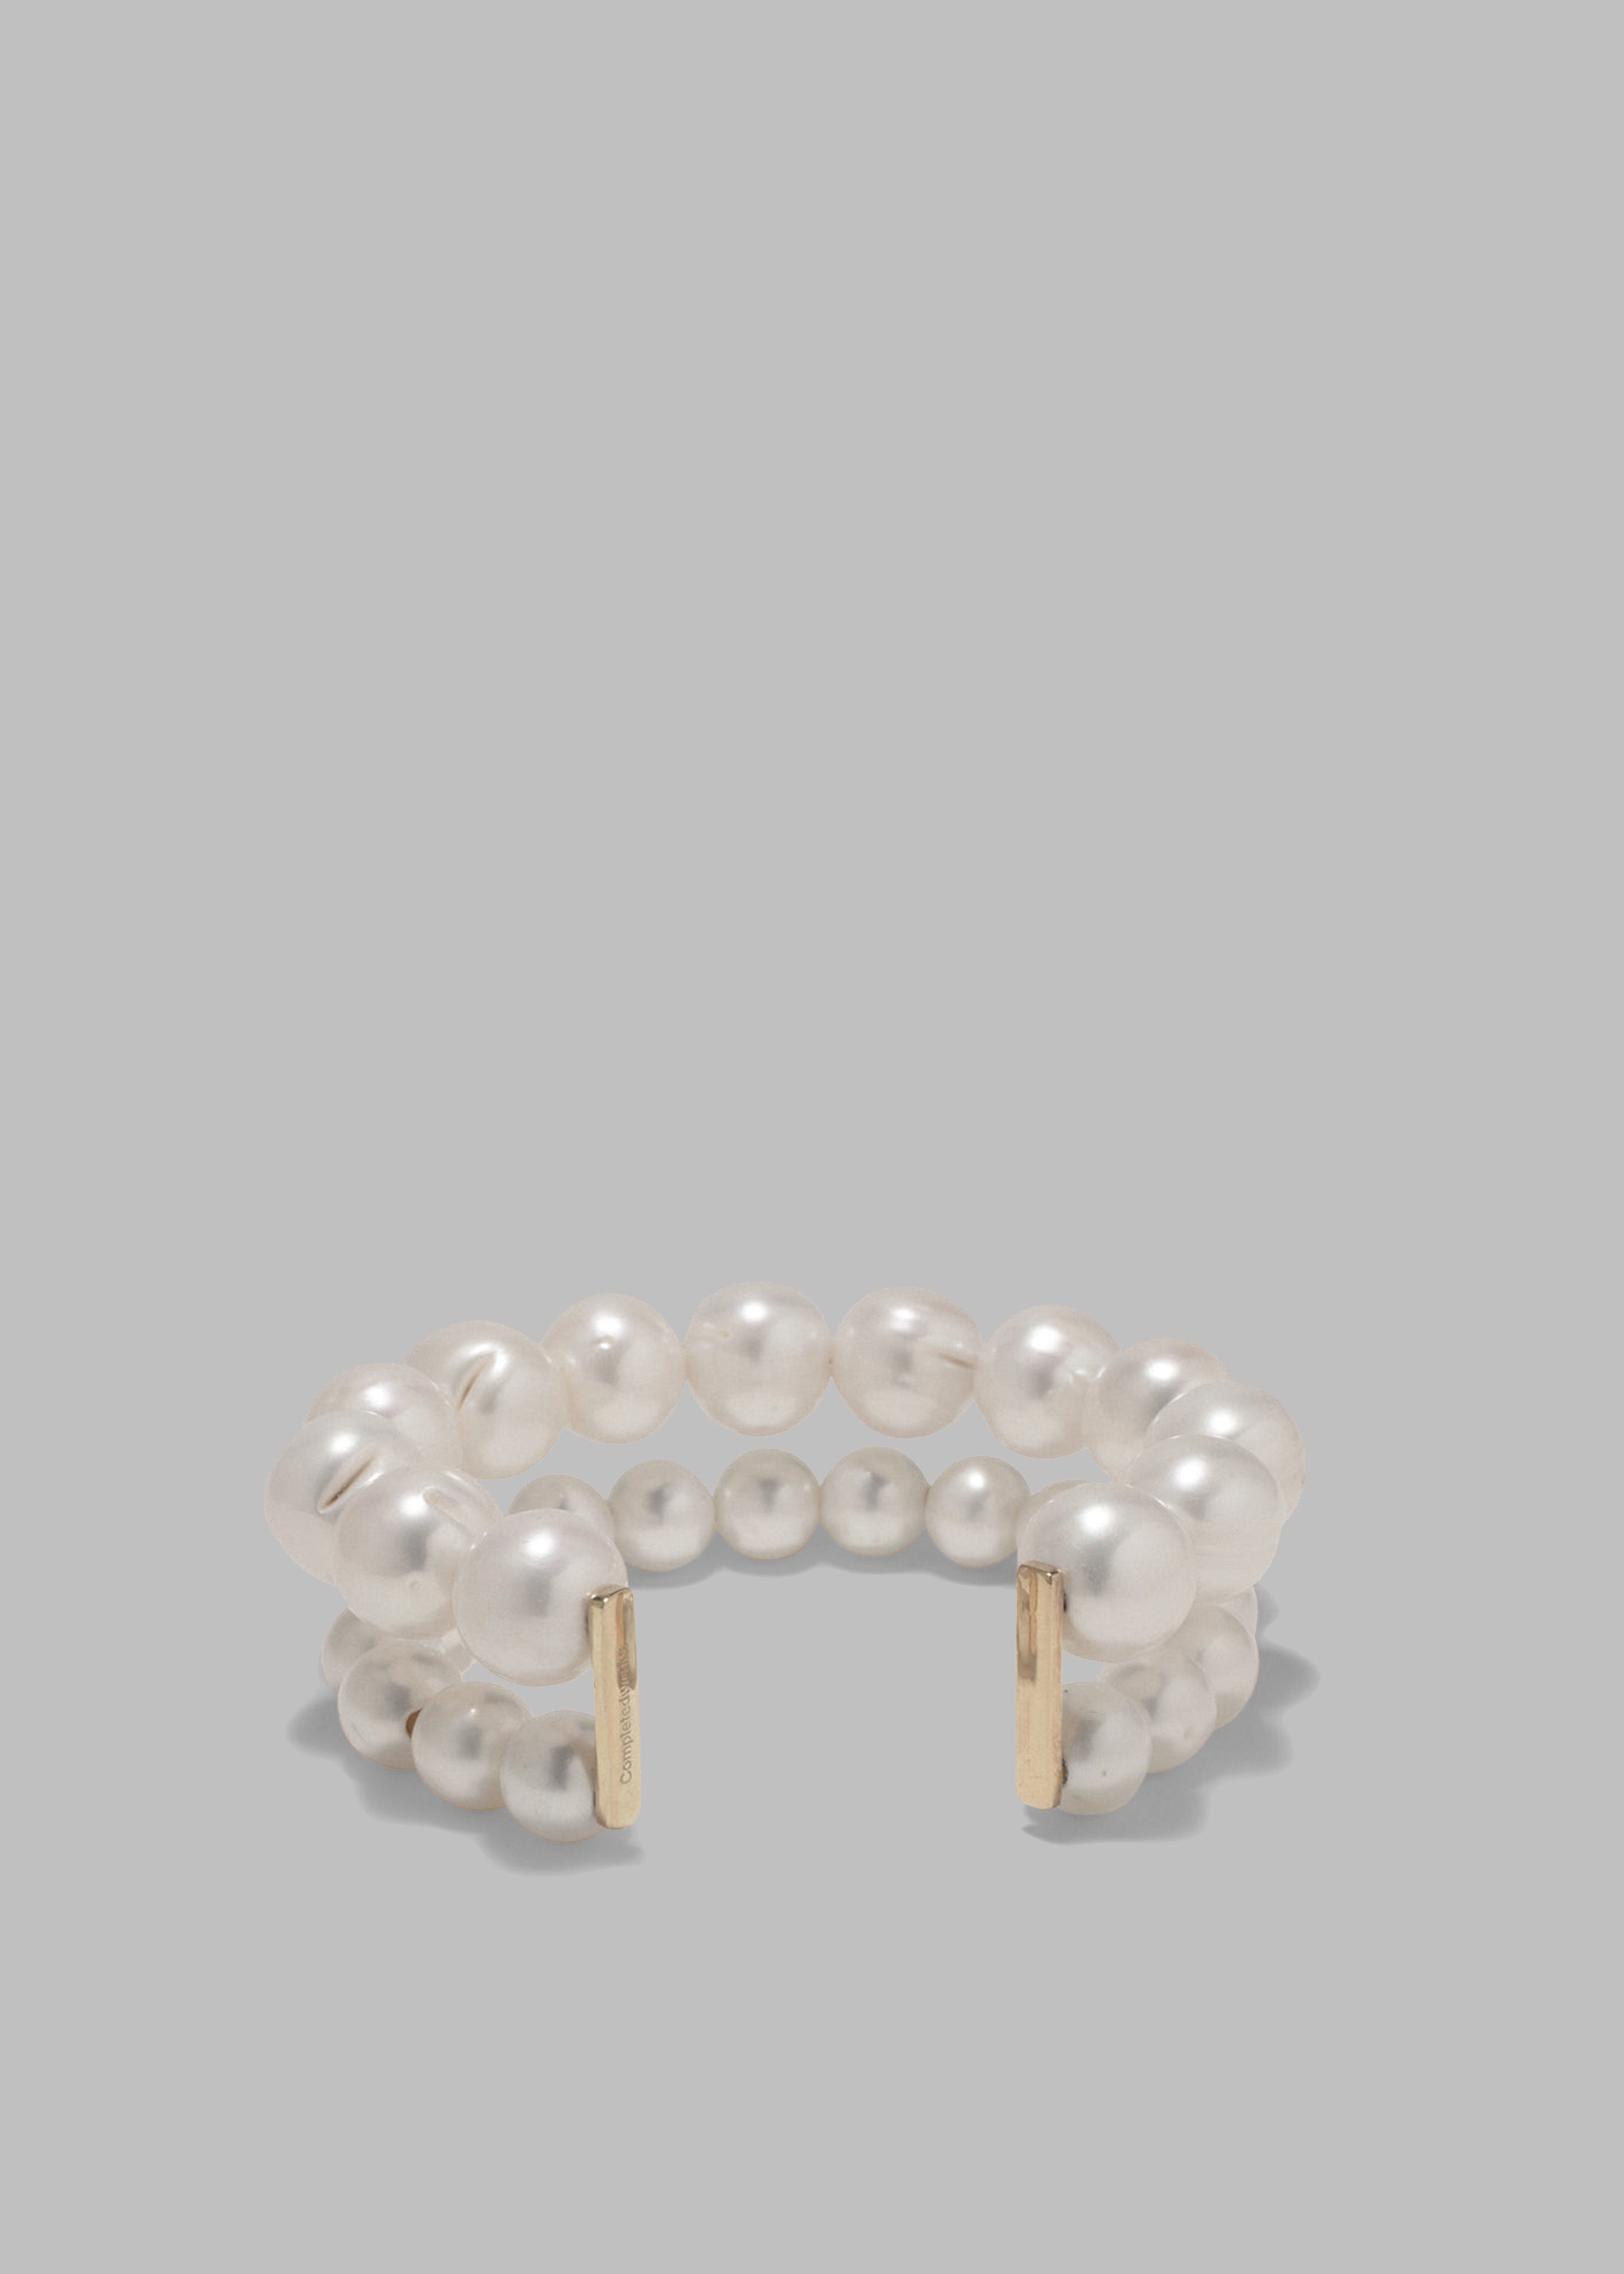 Completedworks One (Blank) Can Change the World Bracelet Cuff - Pearl/Gold Vermeil - 5